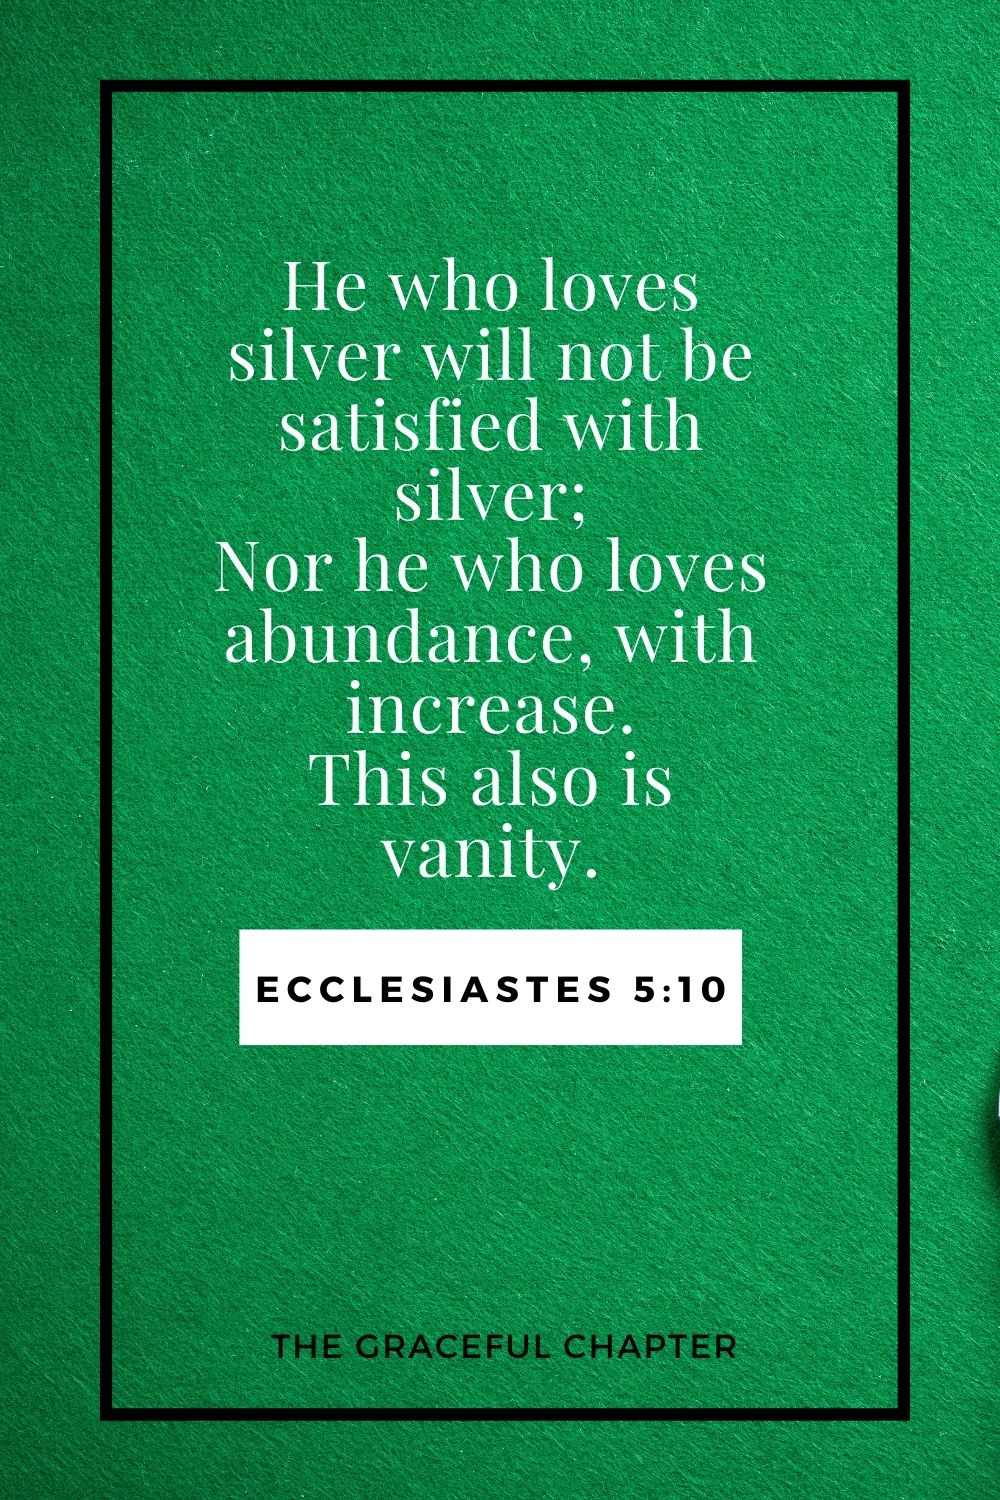 He who loves silver will not be satisfied with silver; Nor he who loves abundance, with increase. This also is vanity. Ecclesiastes 5:10